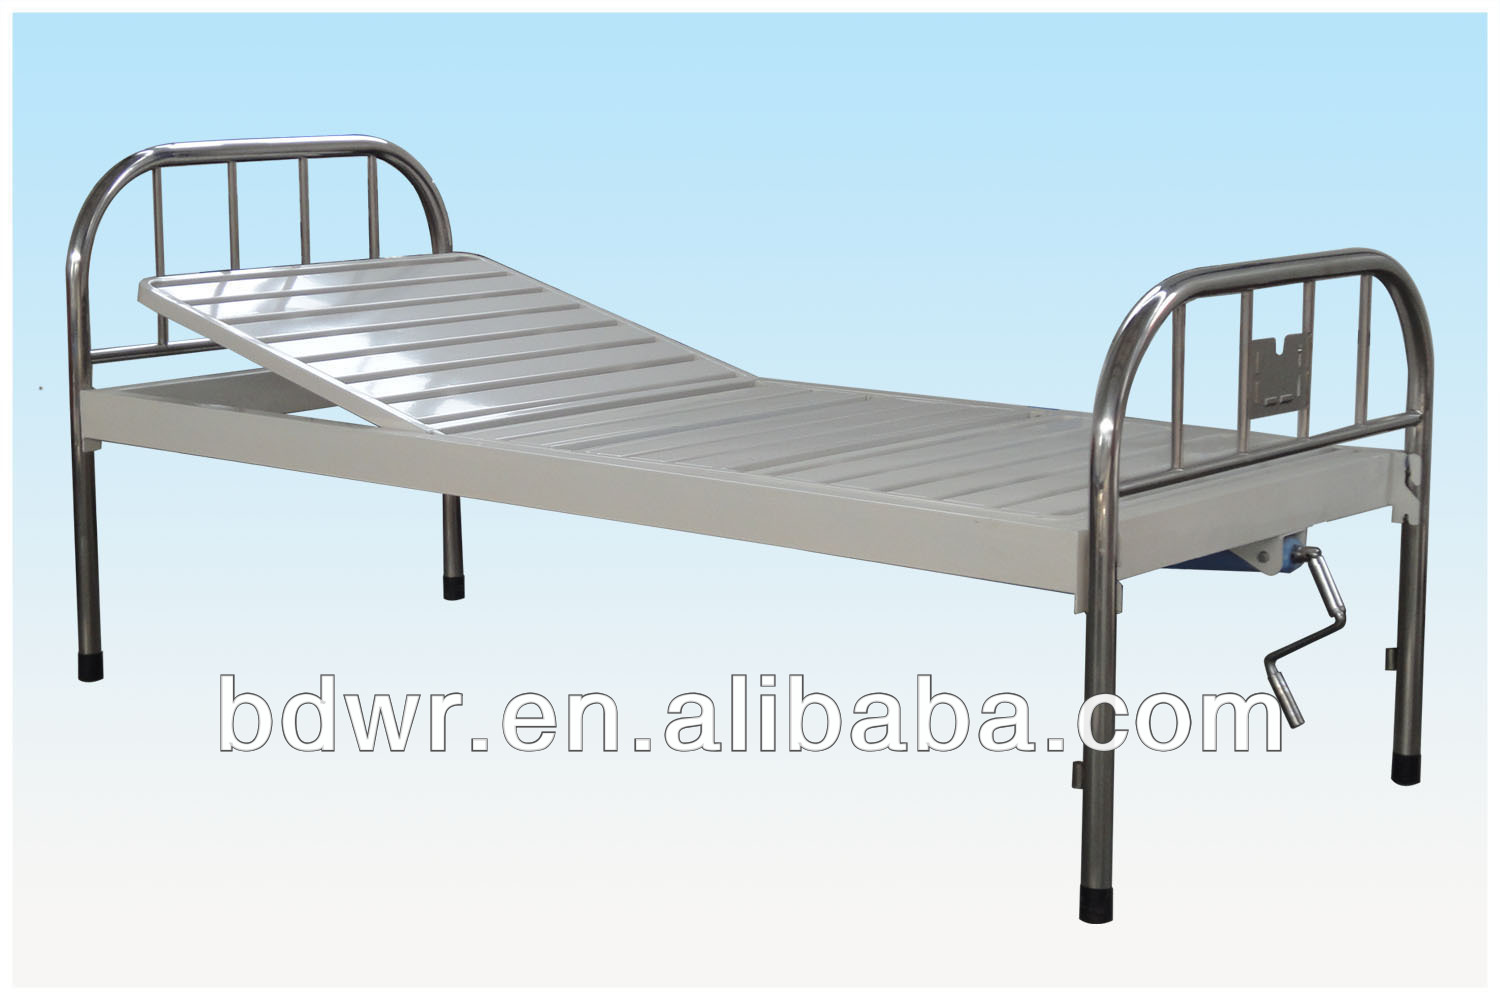 Hospital Bed Stand / Semi-fowler Bed Bed With Abs Headboards Wr-b30 - Buy  Single Crank Hospital Bed/cot,Single-rocker Hospital Bed For Sale,Hospital  Bed